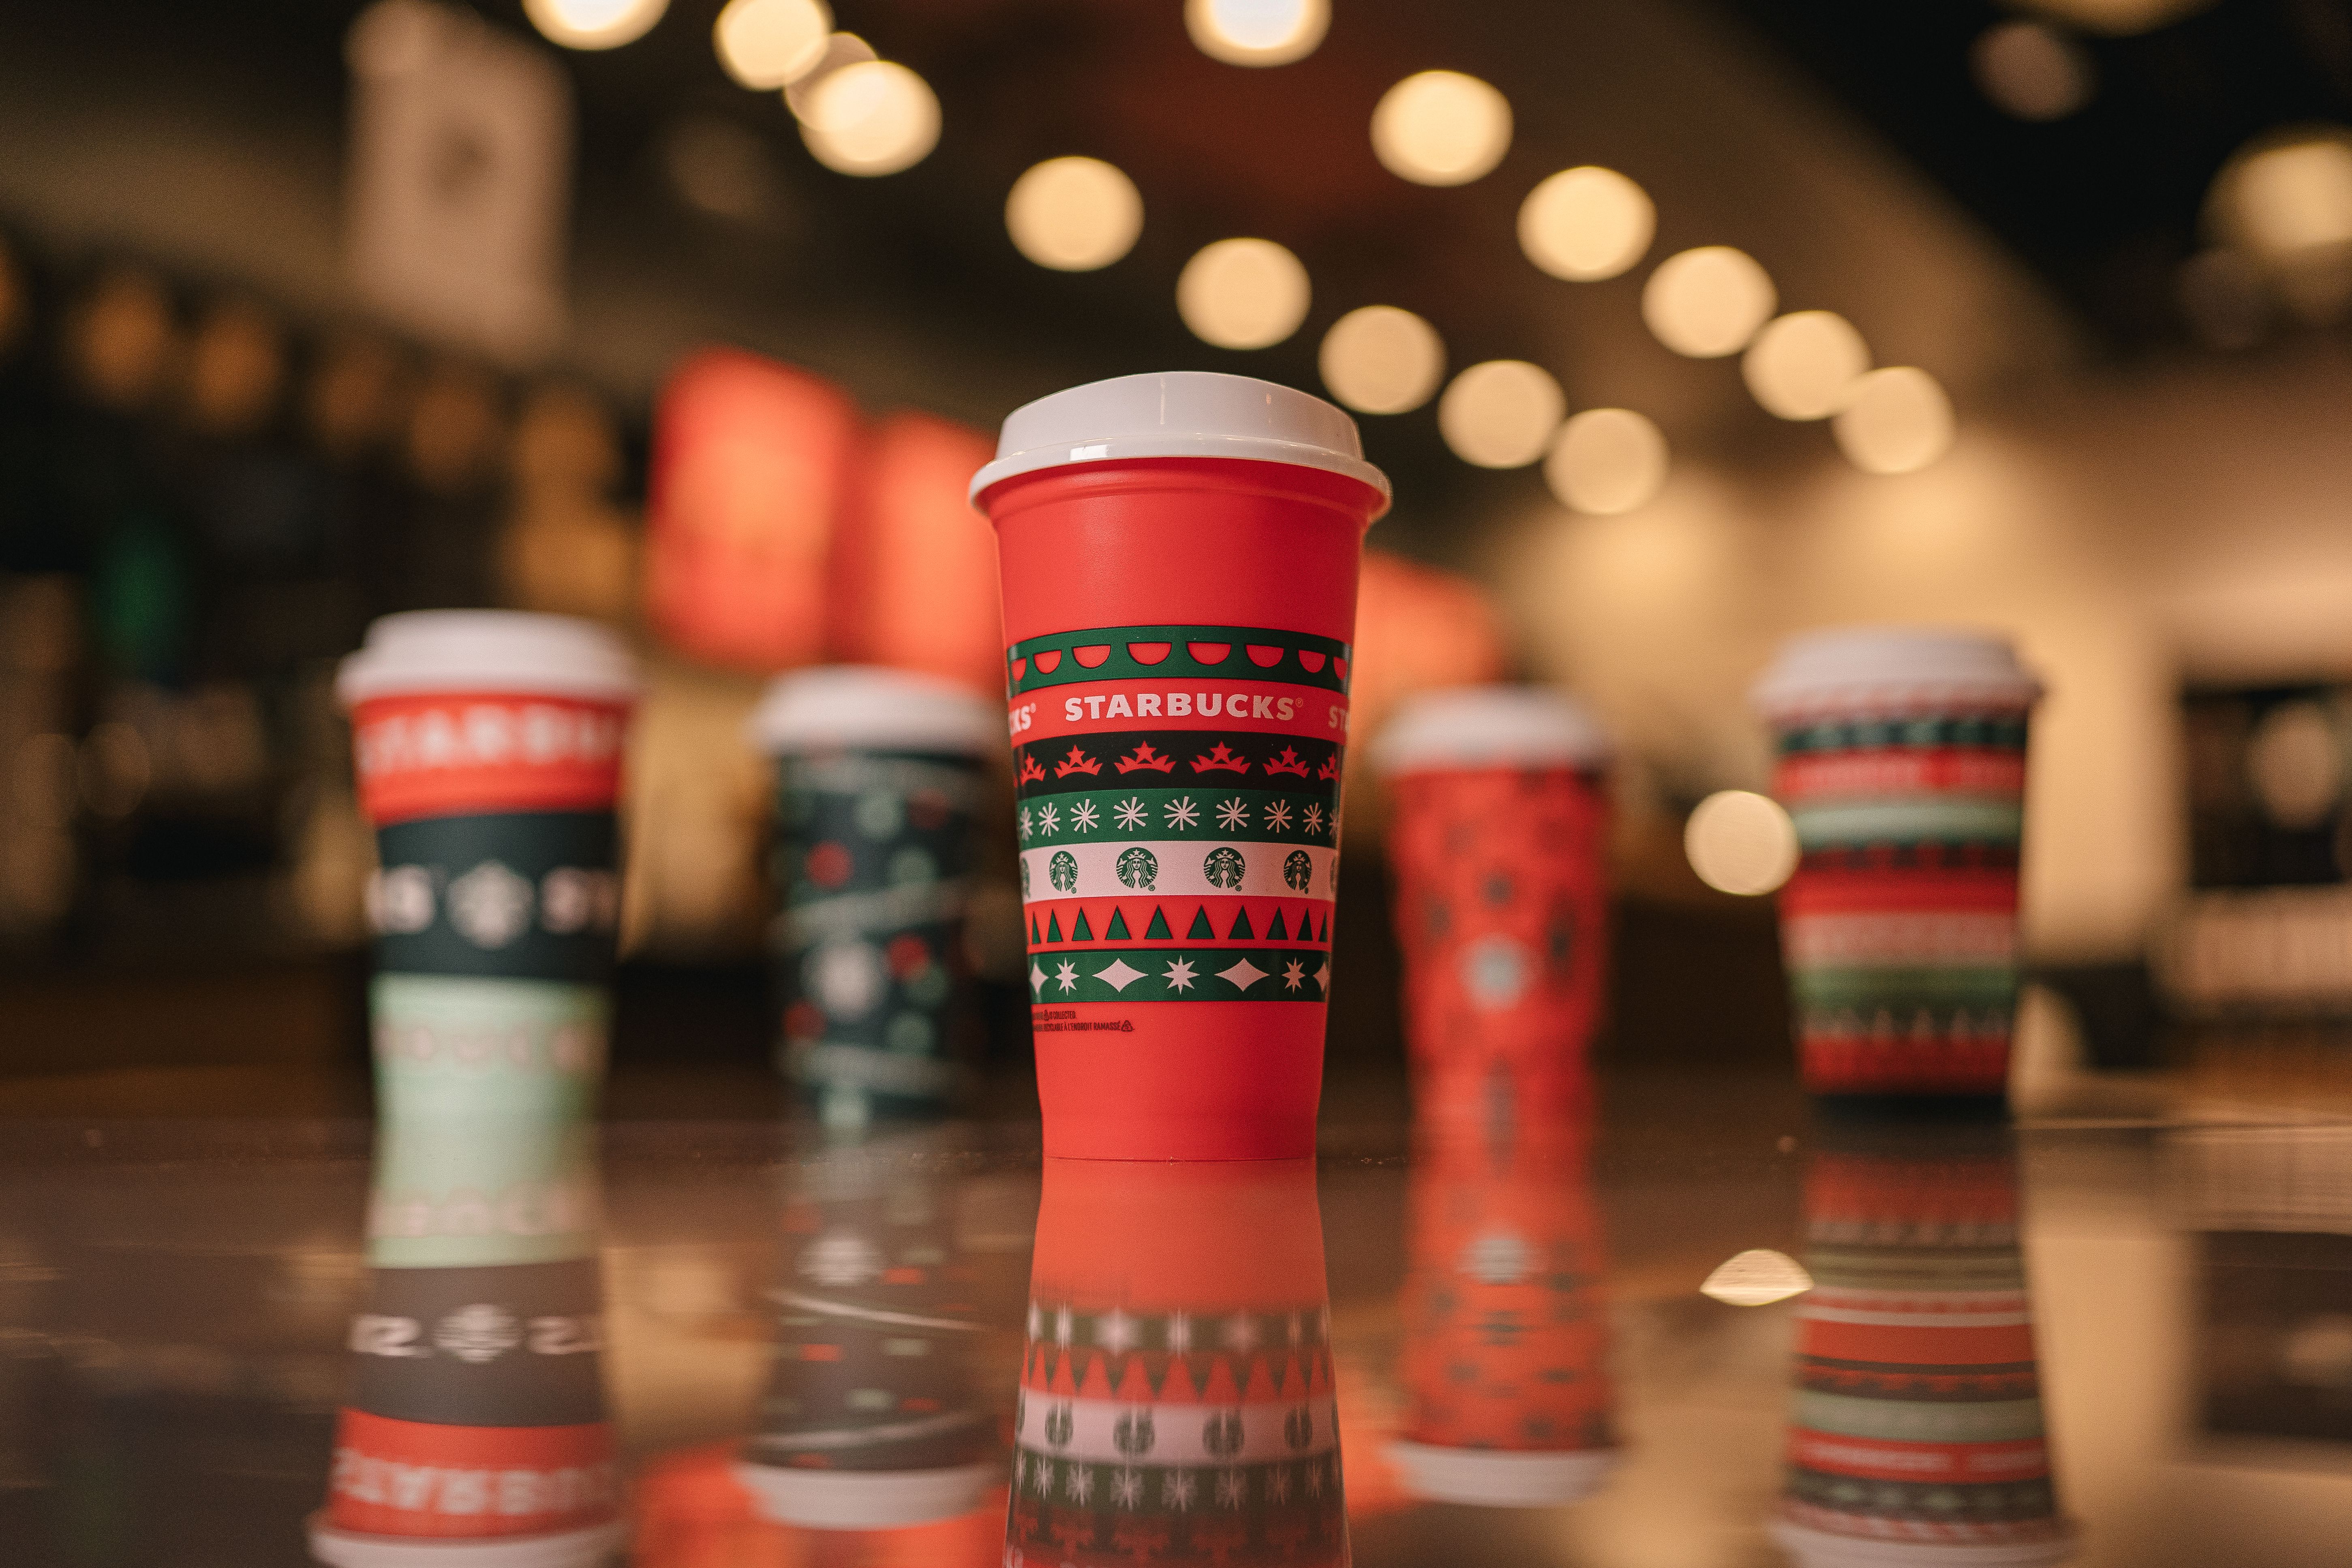 Starbucks' free reusable cup: How to get one for your holiday drinks